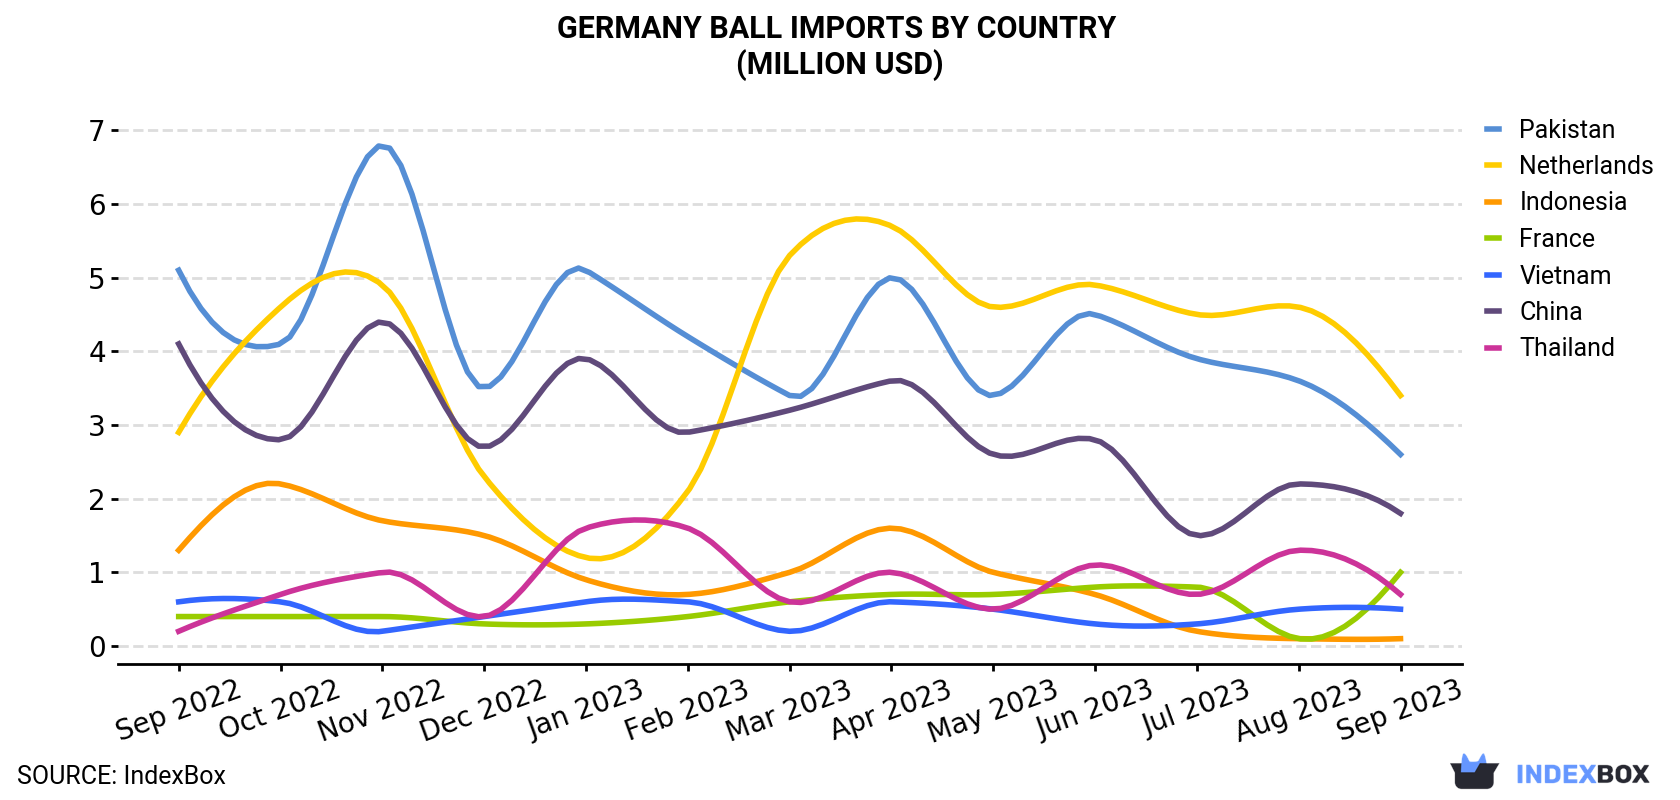 Germany Ball Imports By Country (Million USD)